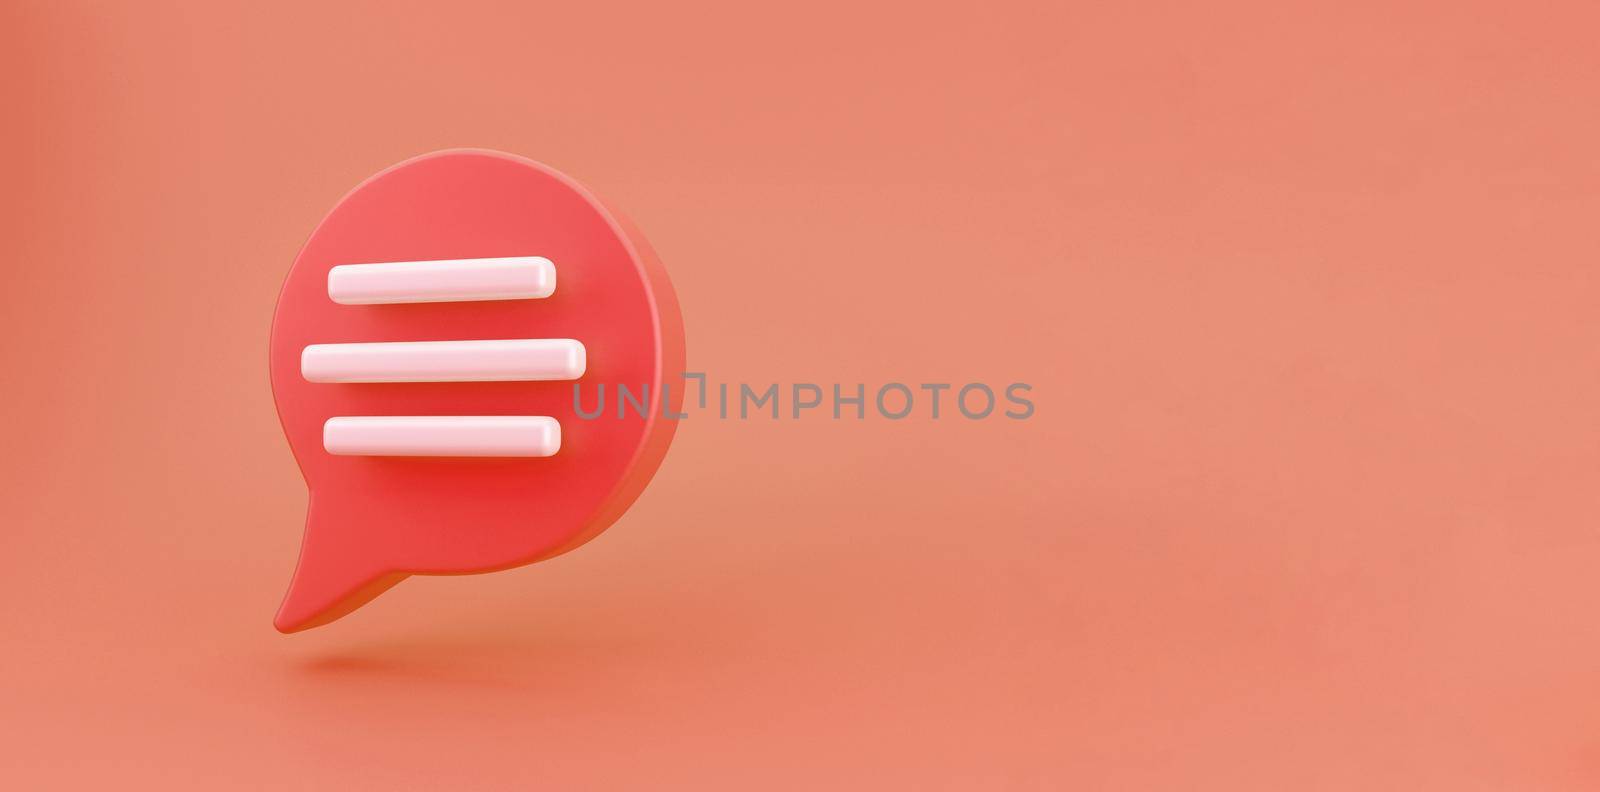 3d red Speech bubble chat icon isolated on orange background. Message creative concept with copy space for text. Communication or comment chat symbol. Minimalism concept. 3d illustration render